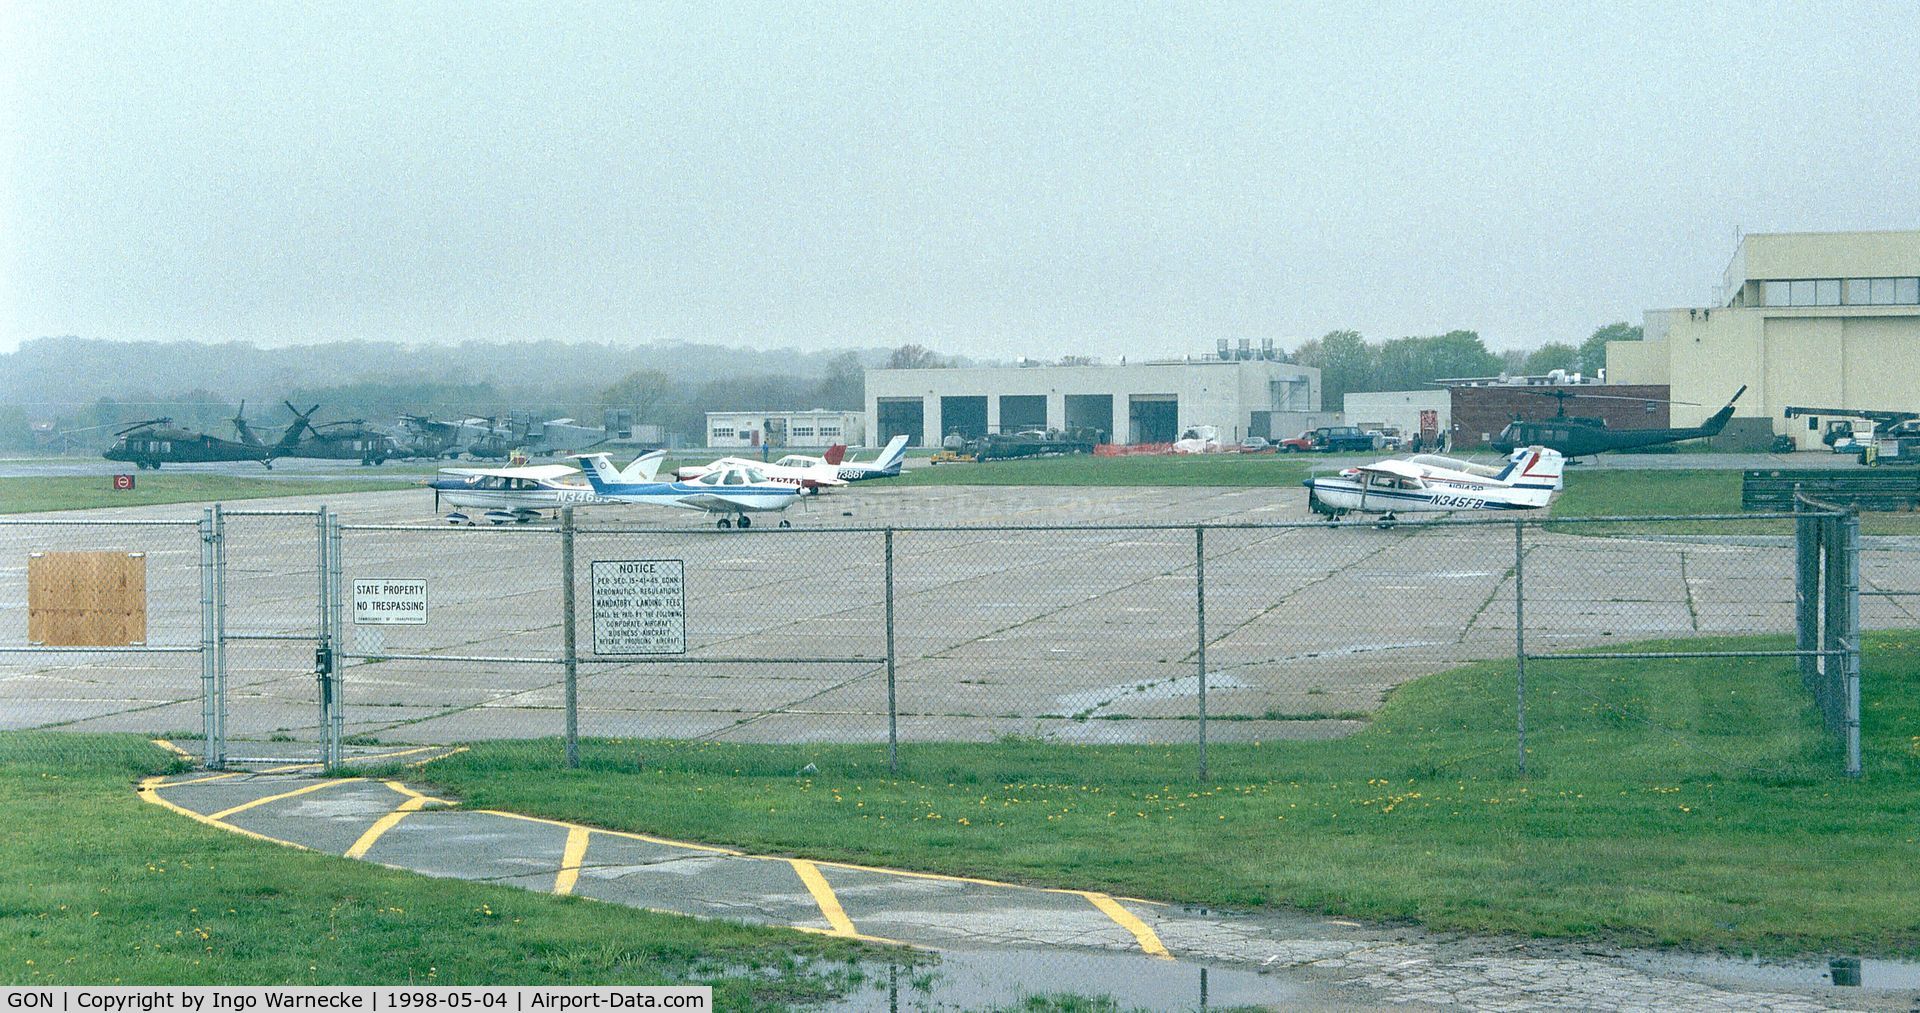 Groton-new London Airport (GON) - Groton-New London airport apron on a rainy day